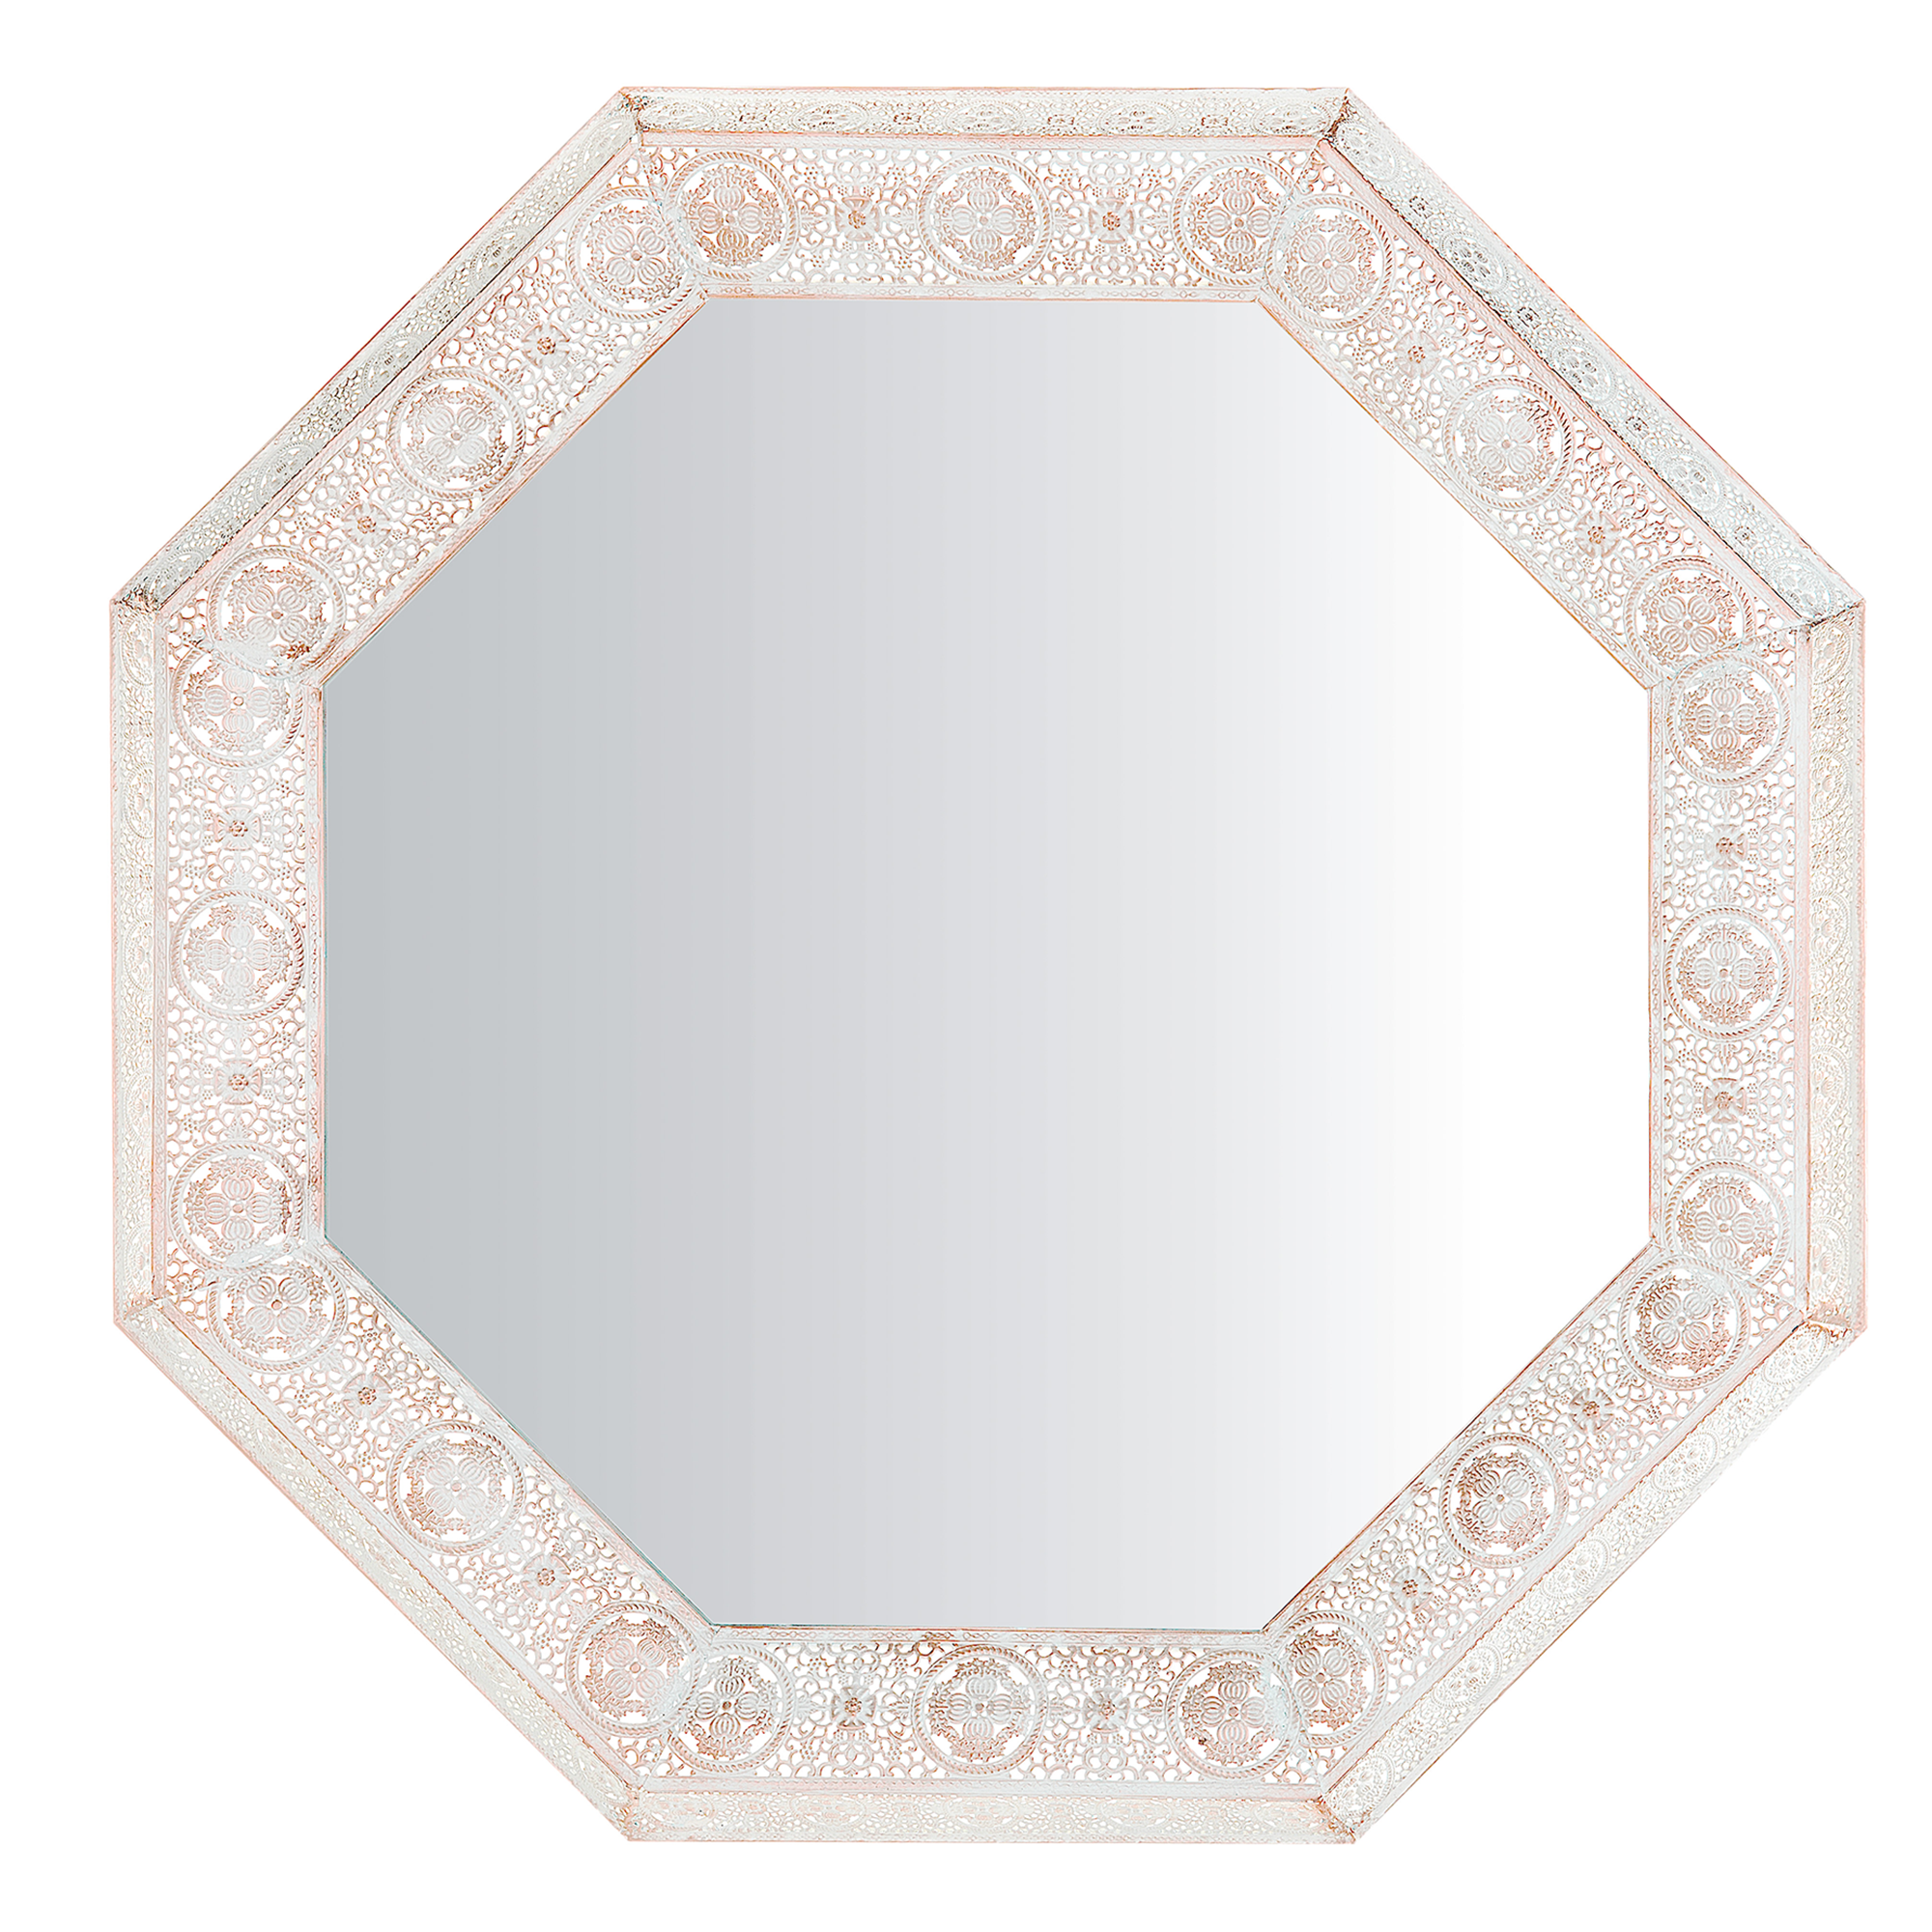 Beliani Wall Mounted Hanging Mirror White with Copper Geometric Lace Frame